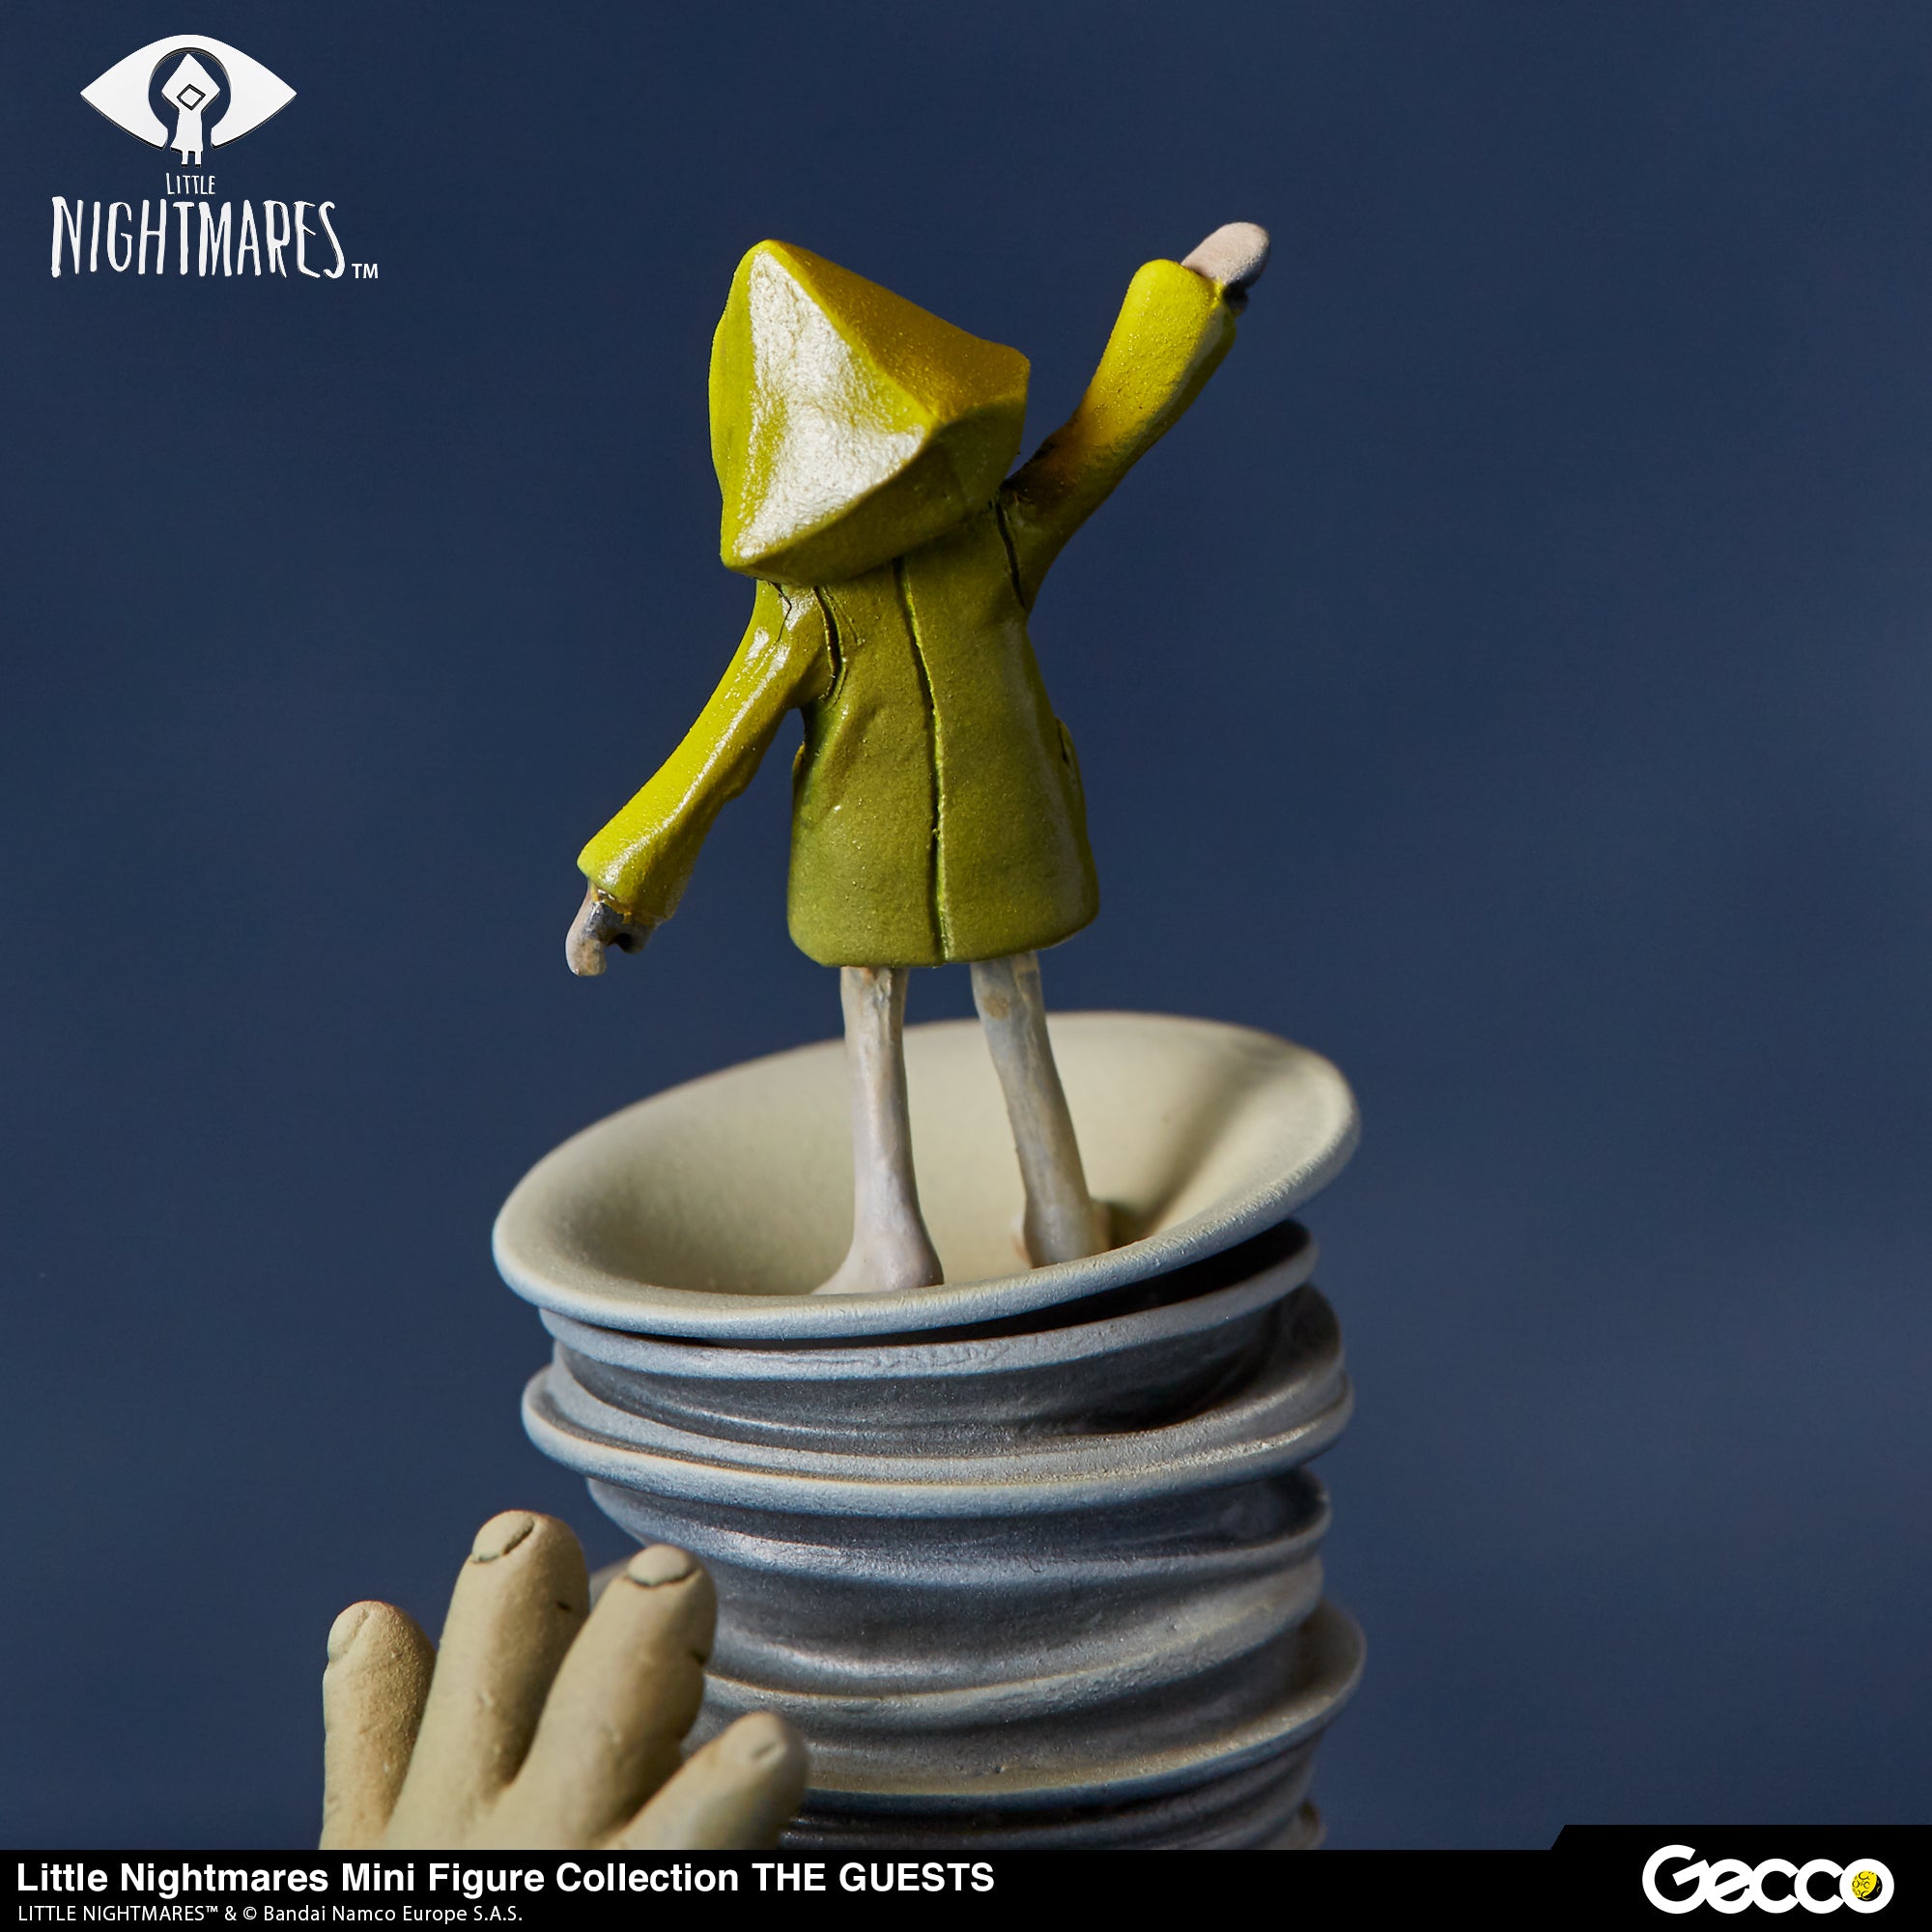 Little Nightmares: The Guests: Mini Figure Collection: Gecco